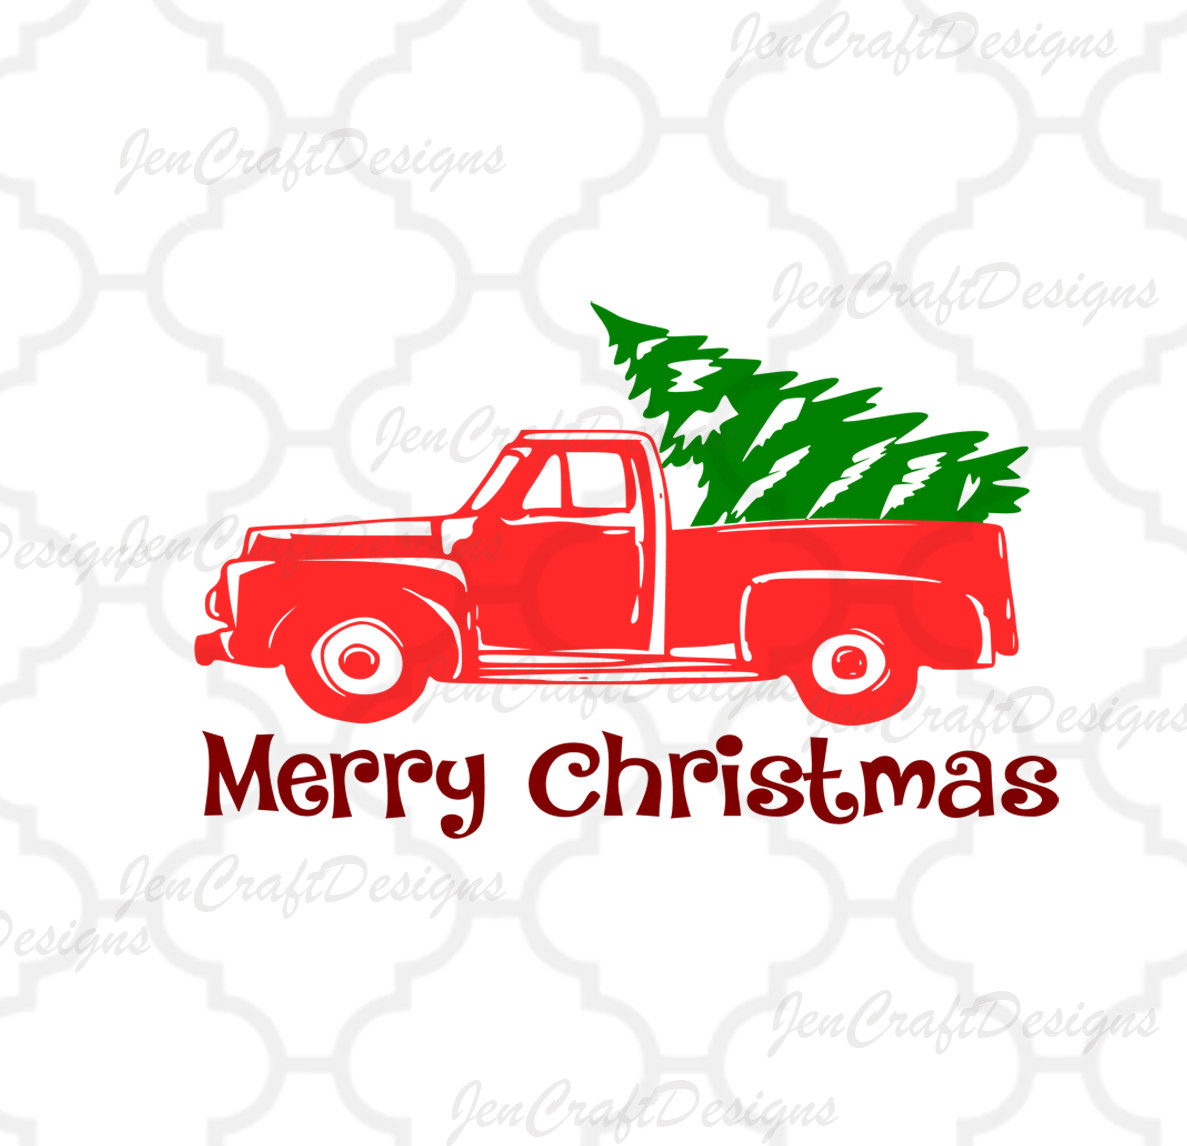 Download Red Christmas Truck Svg Cut File Antique Vector Tree Winter Holidays Vintage Svg Classic Truck Svg Dxf Eps Png Silhouette Cricut